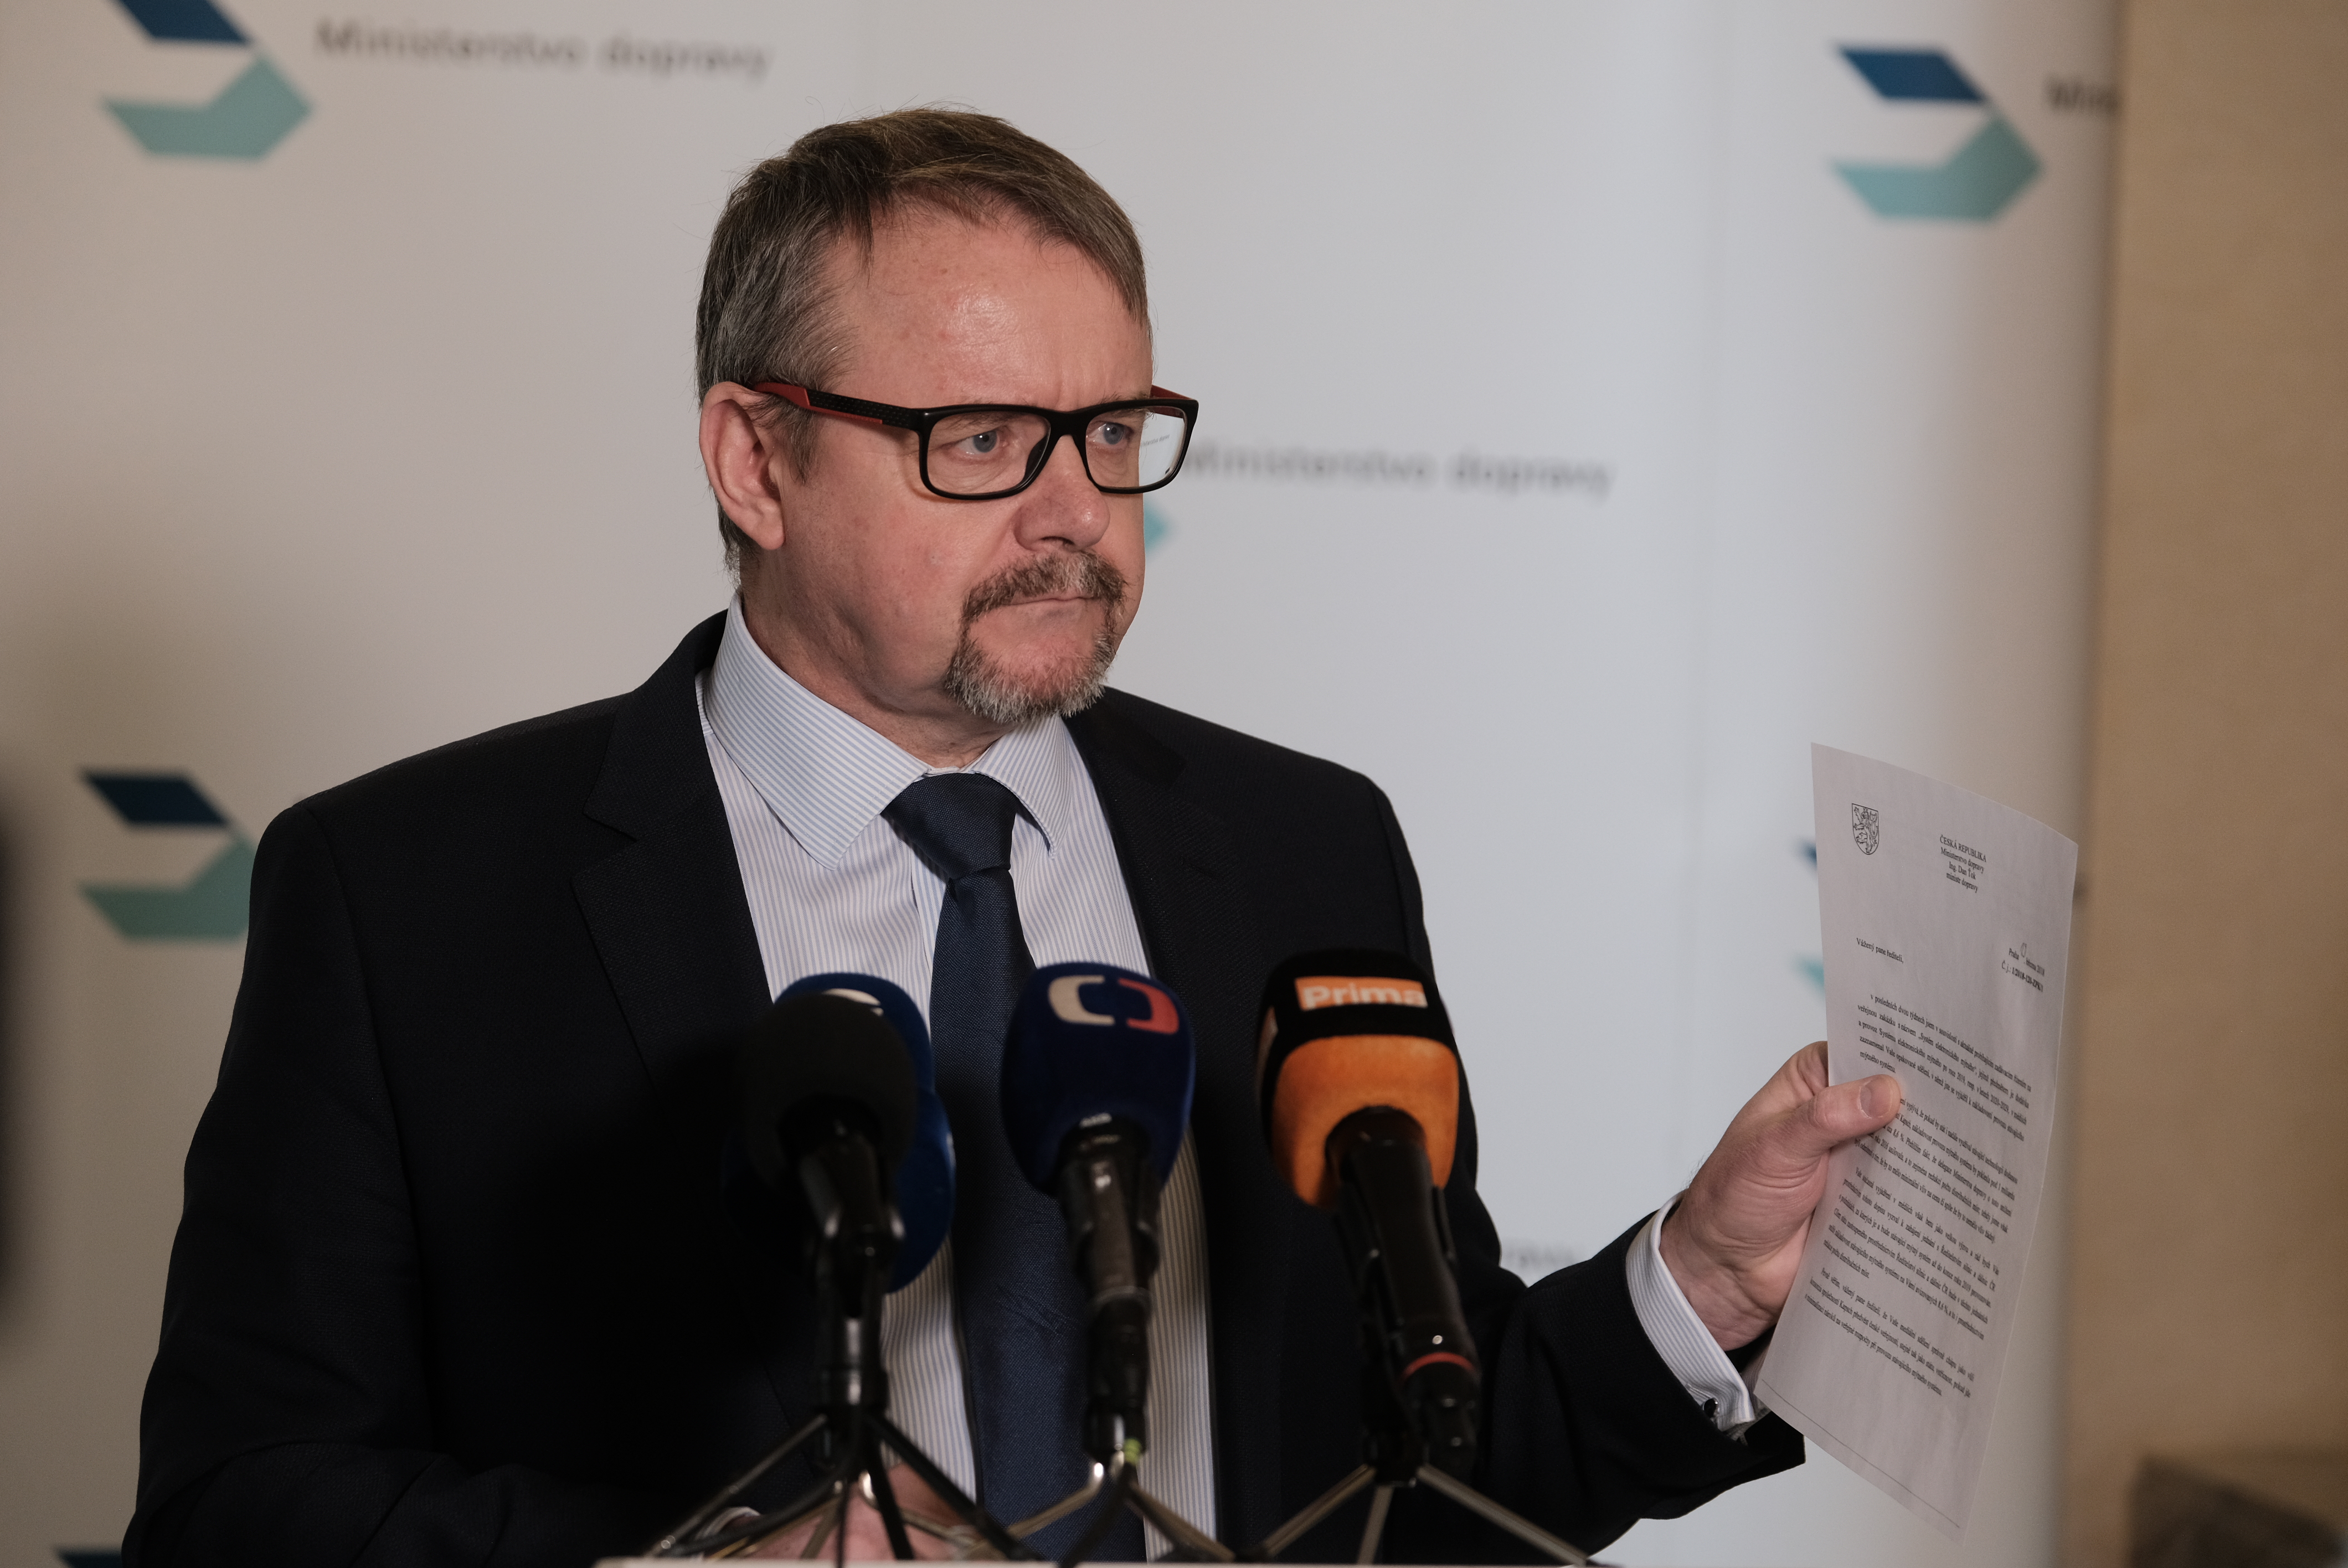 Ťok was defending the rights of Czech shipping companies in Luxembourg